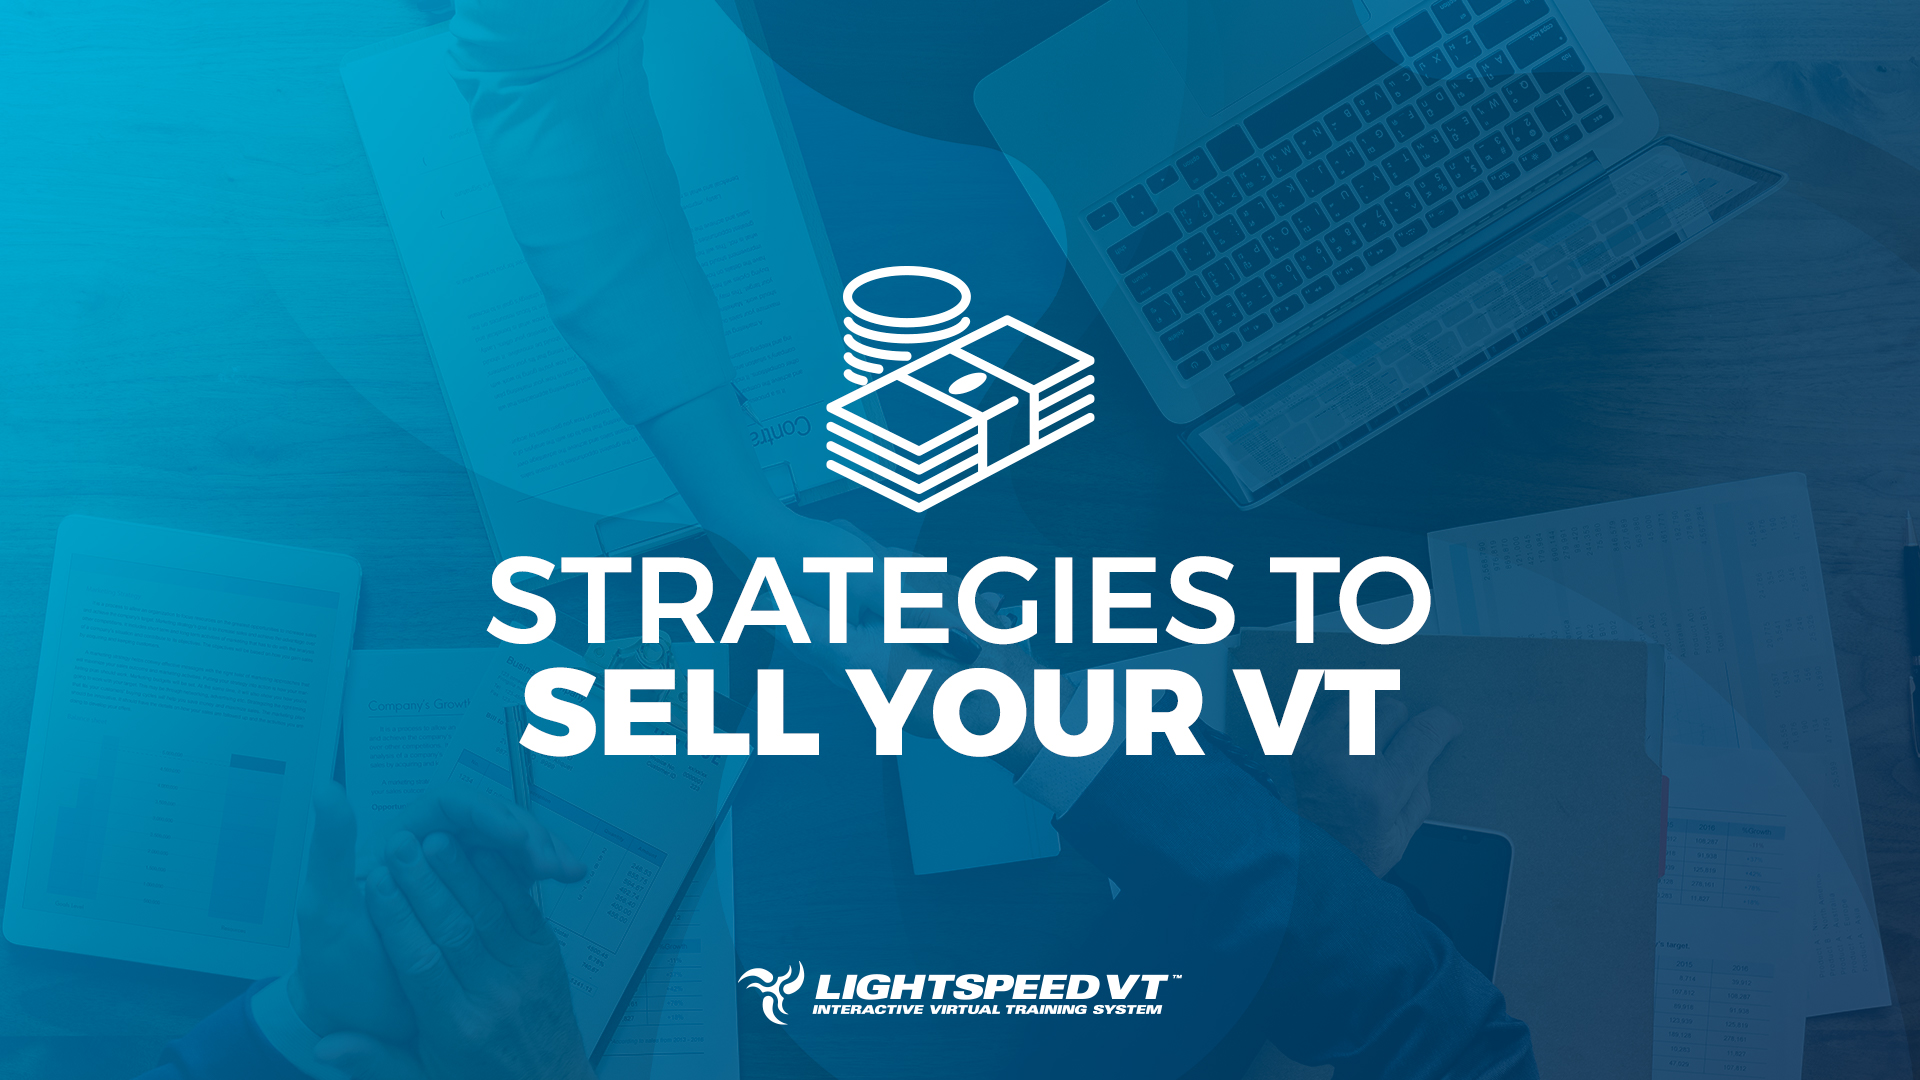 Schedule a Guided Demo of LightSpeed VT